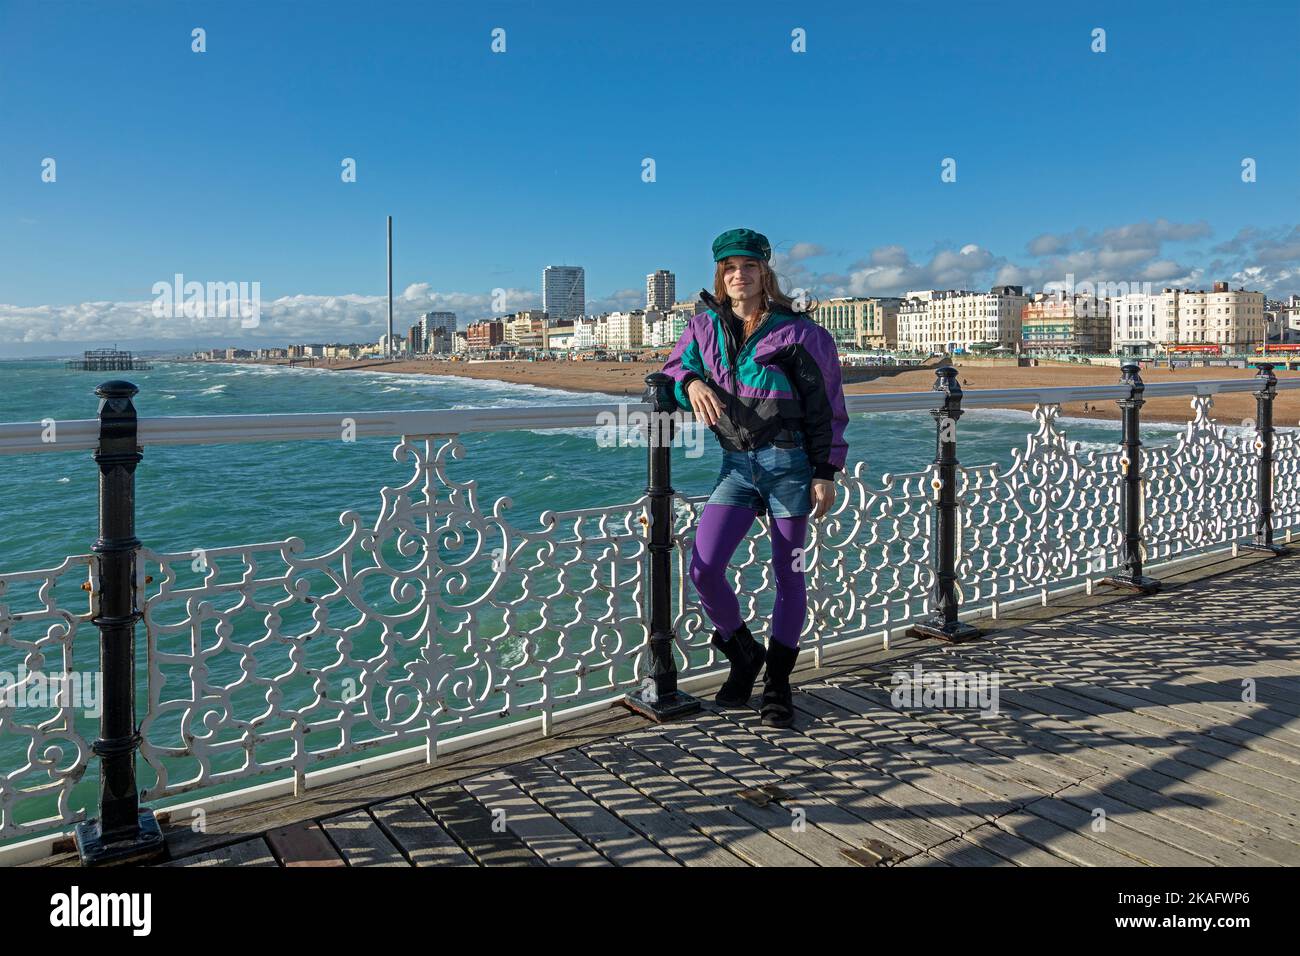 Colourfully dressed teenage boy, Palace Pier, Brigthon, England, Great Britain Stock Photo